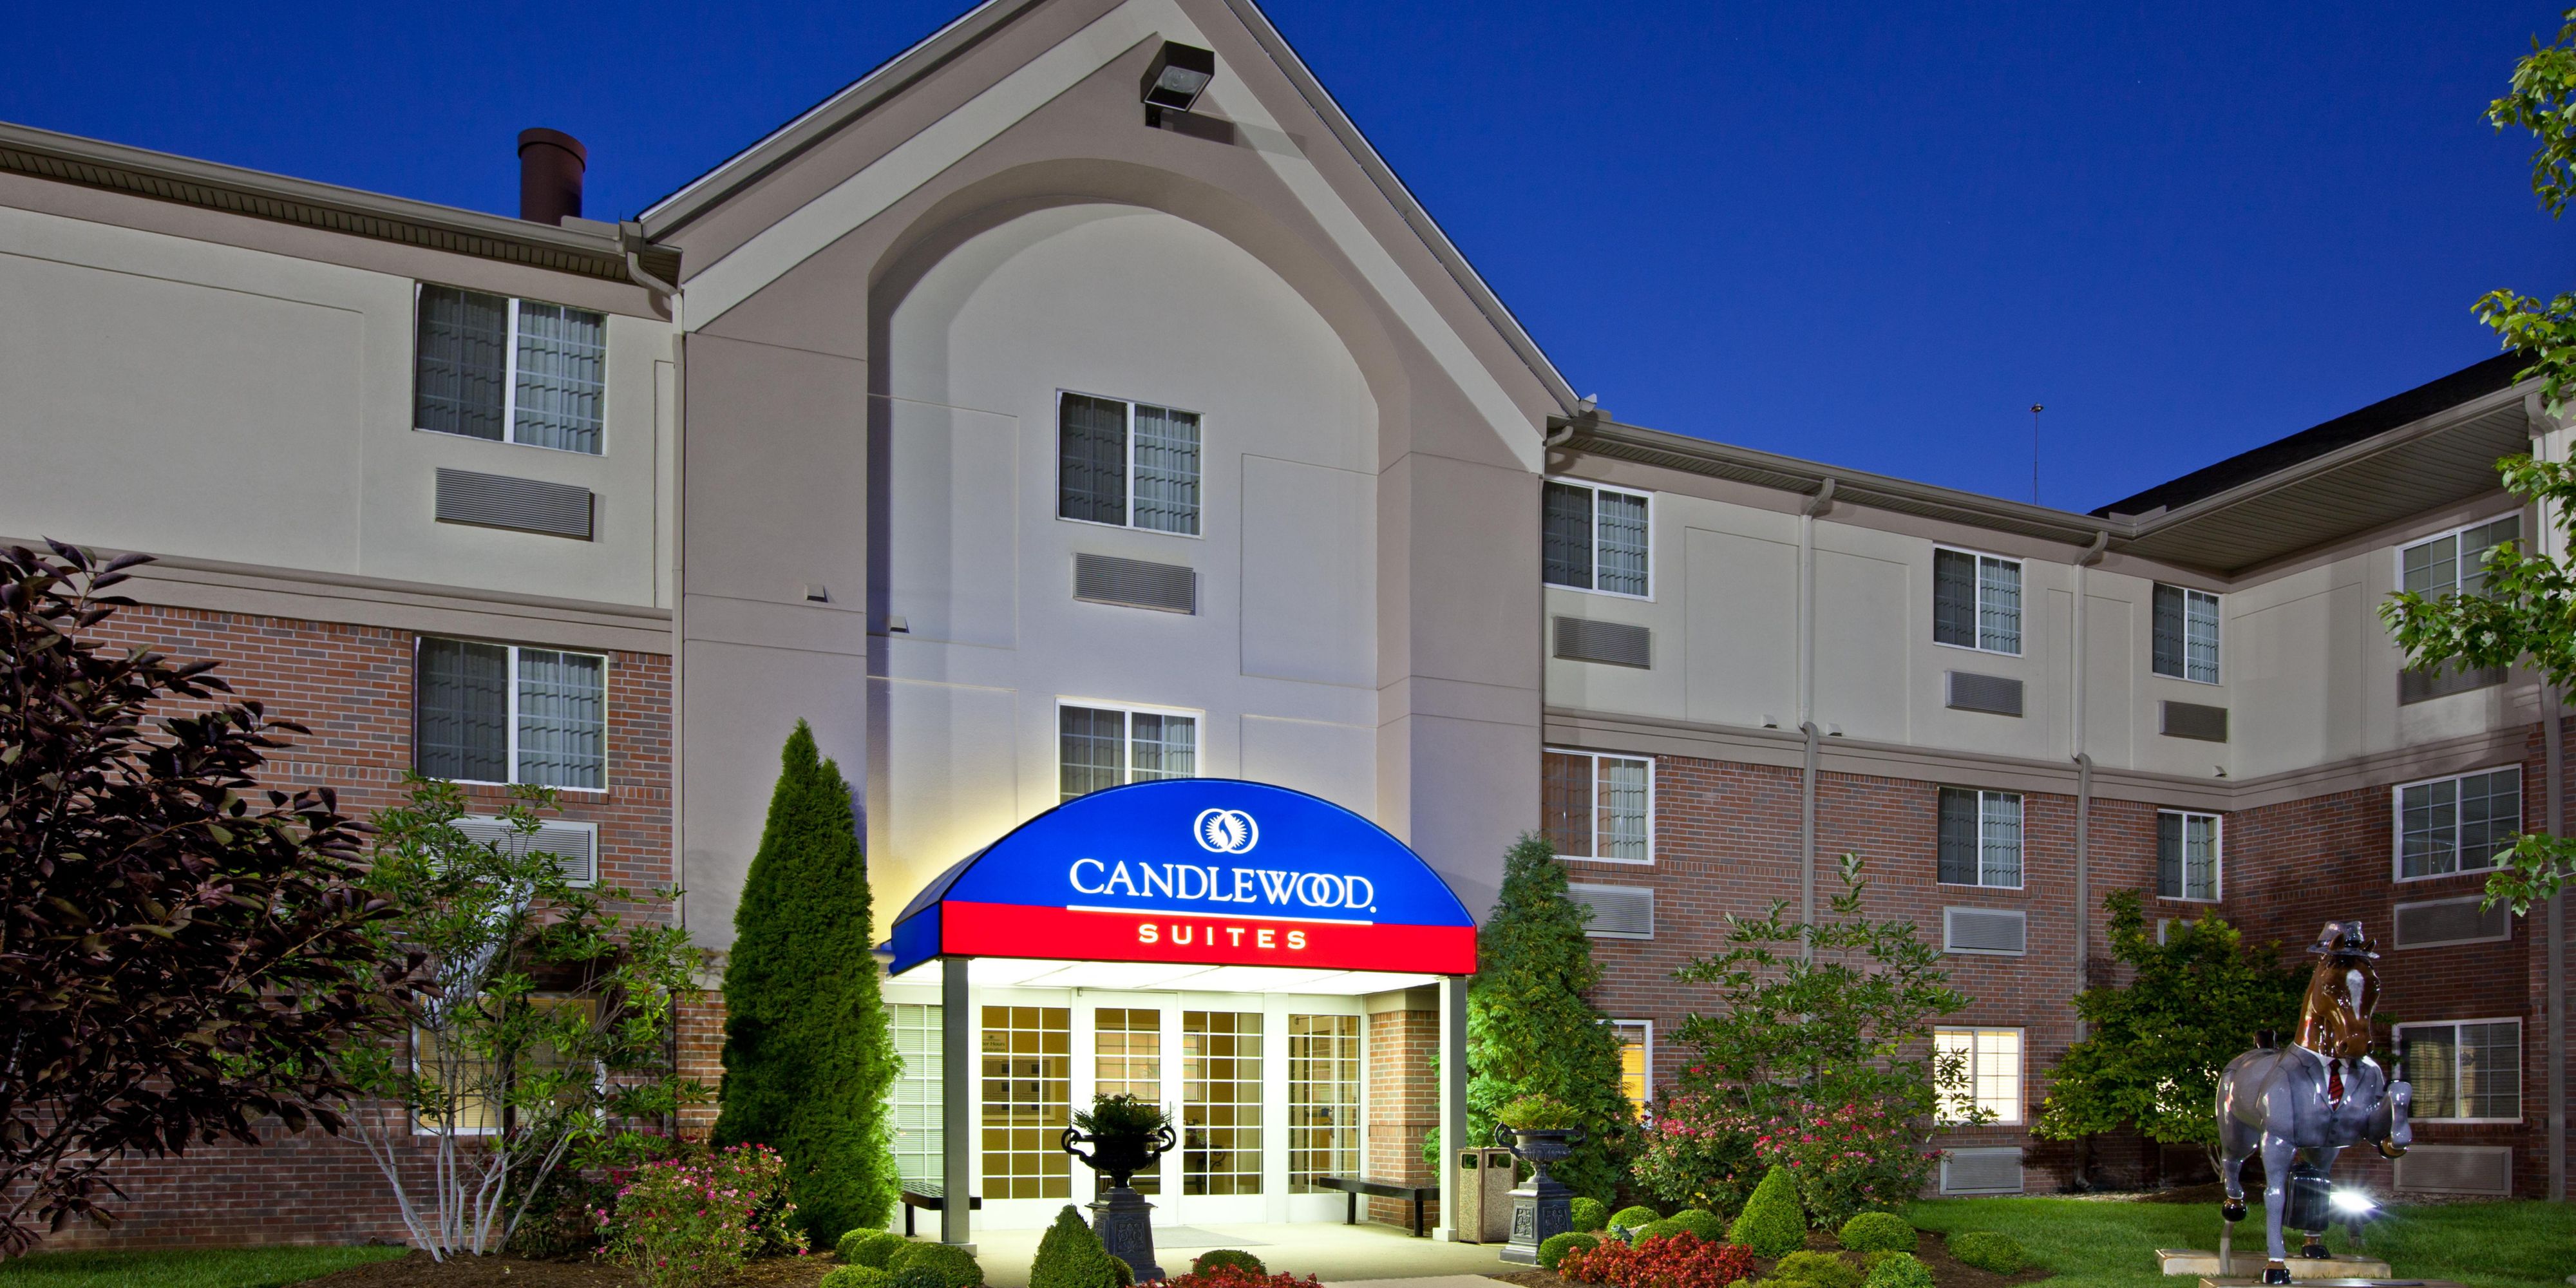 Candlewood Suites Louisville 2533233161 2x1